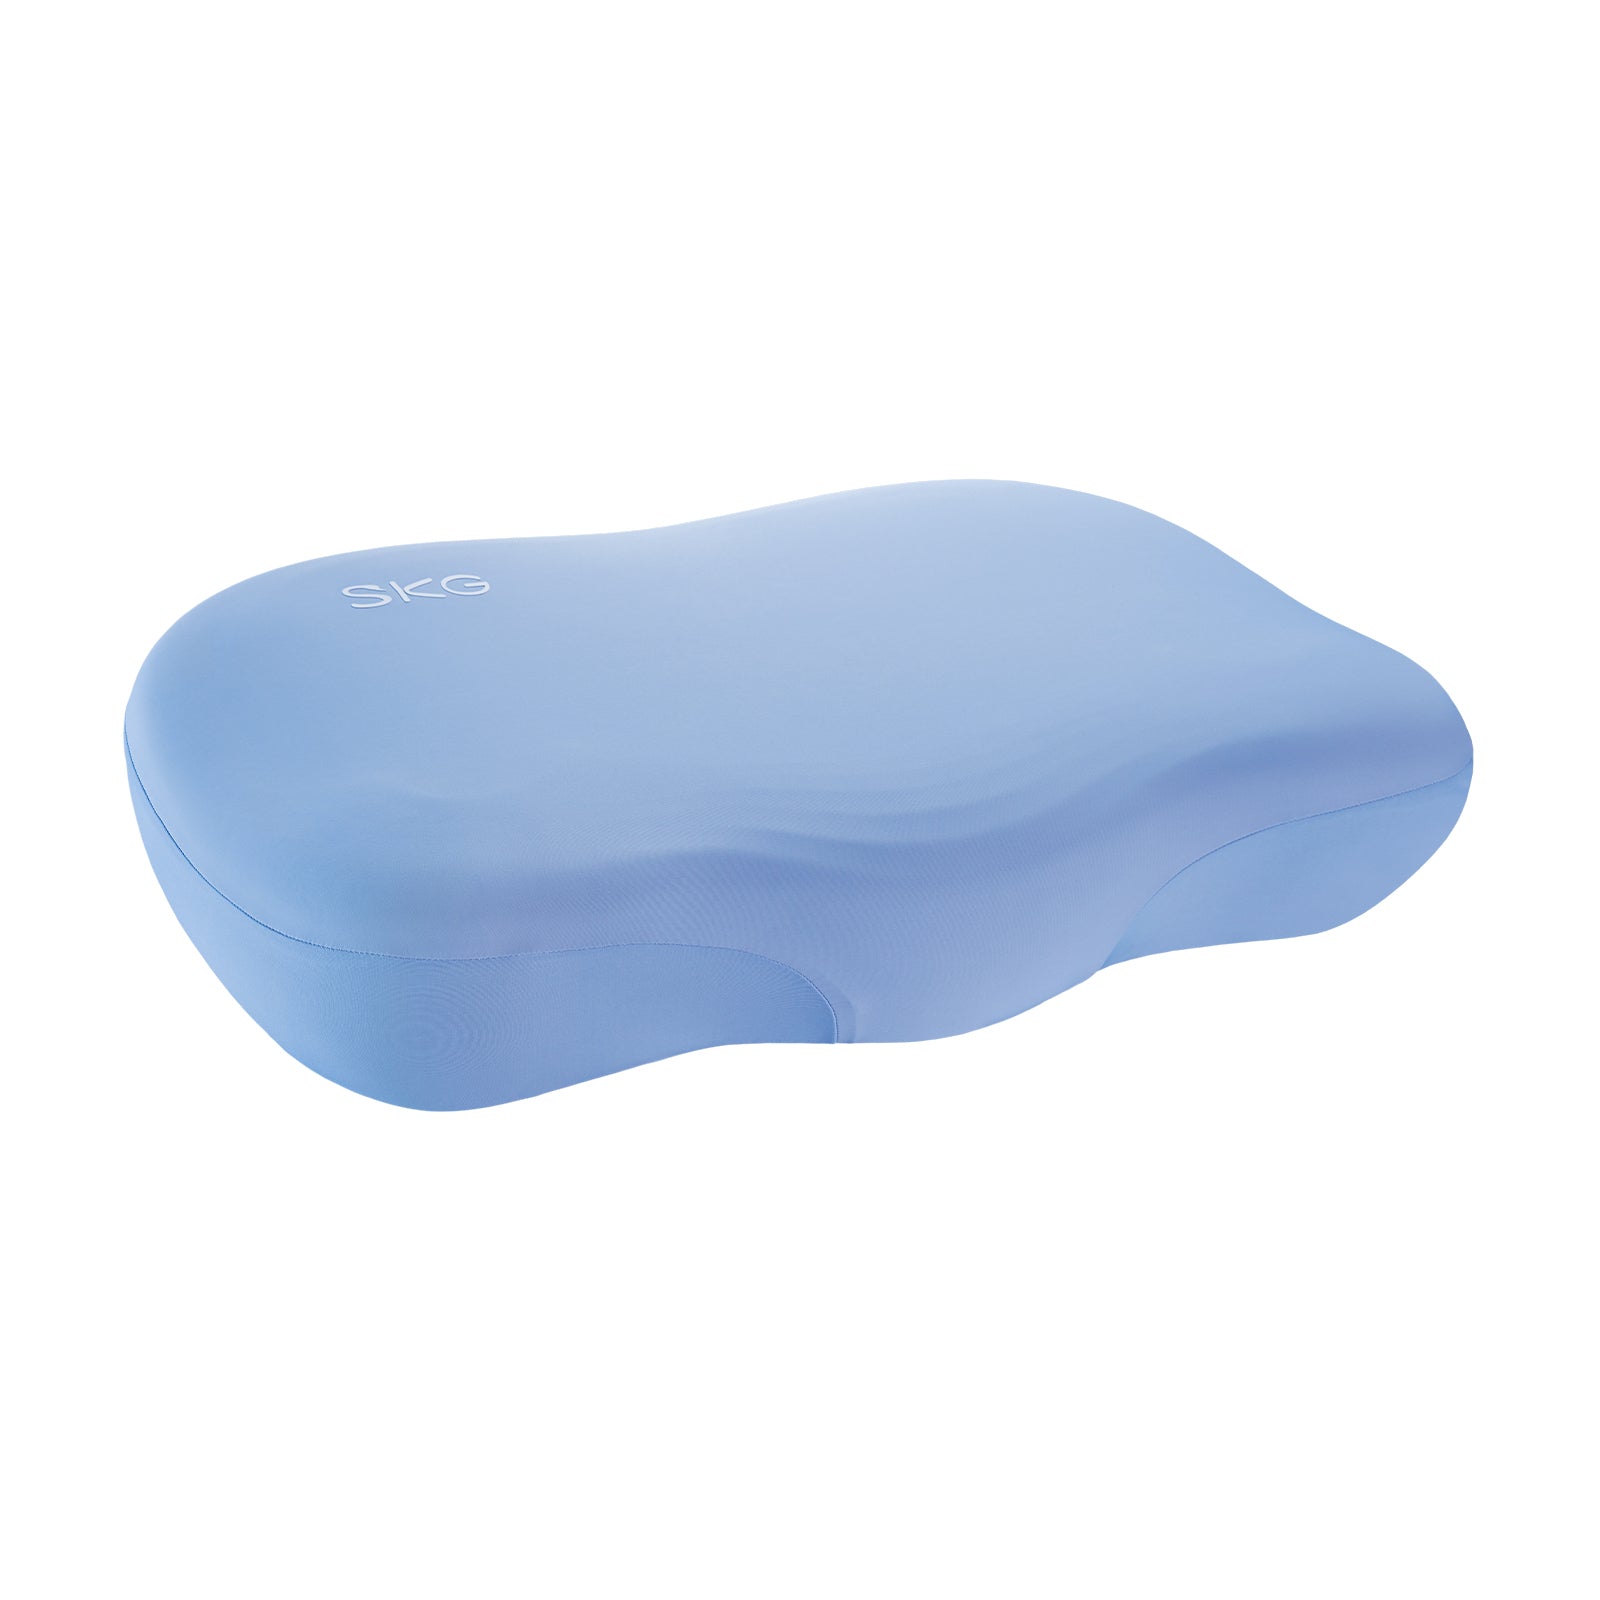 SKG T3E Cooling Pillow with Cochlear Shape and Whale-Inspired Design